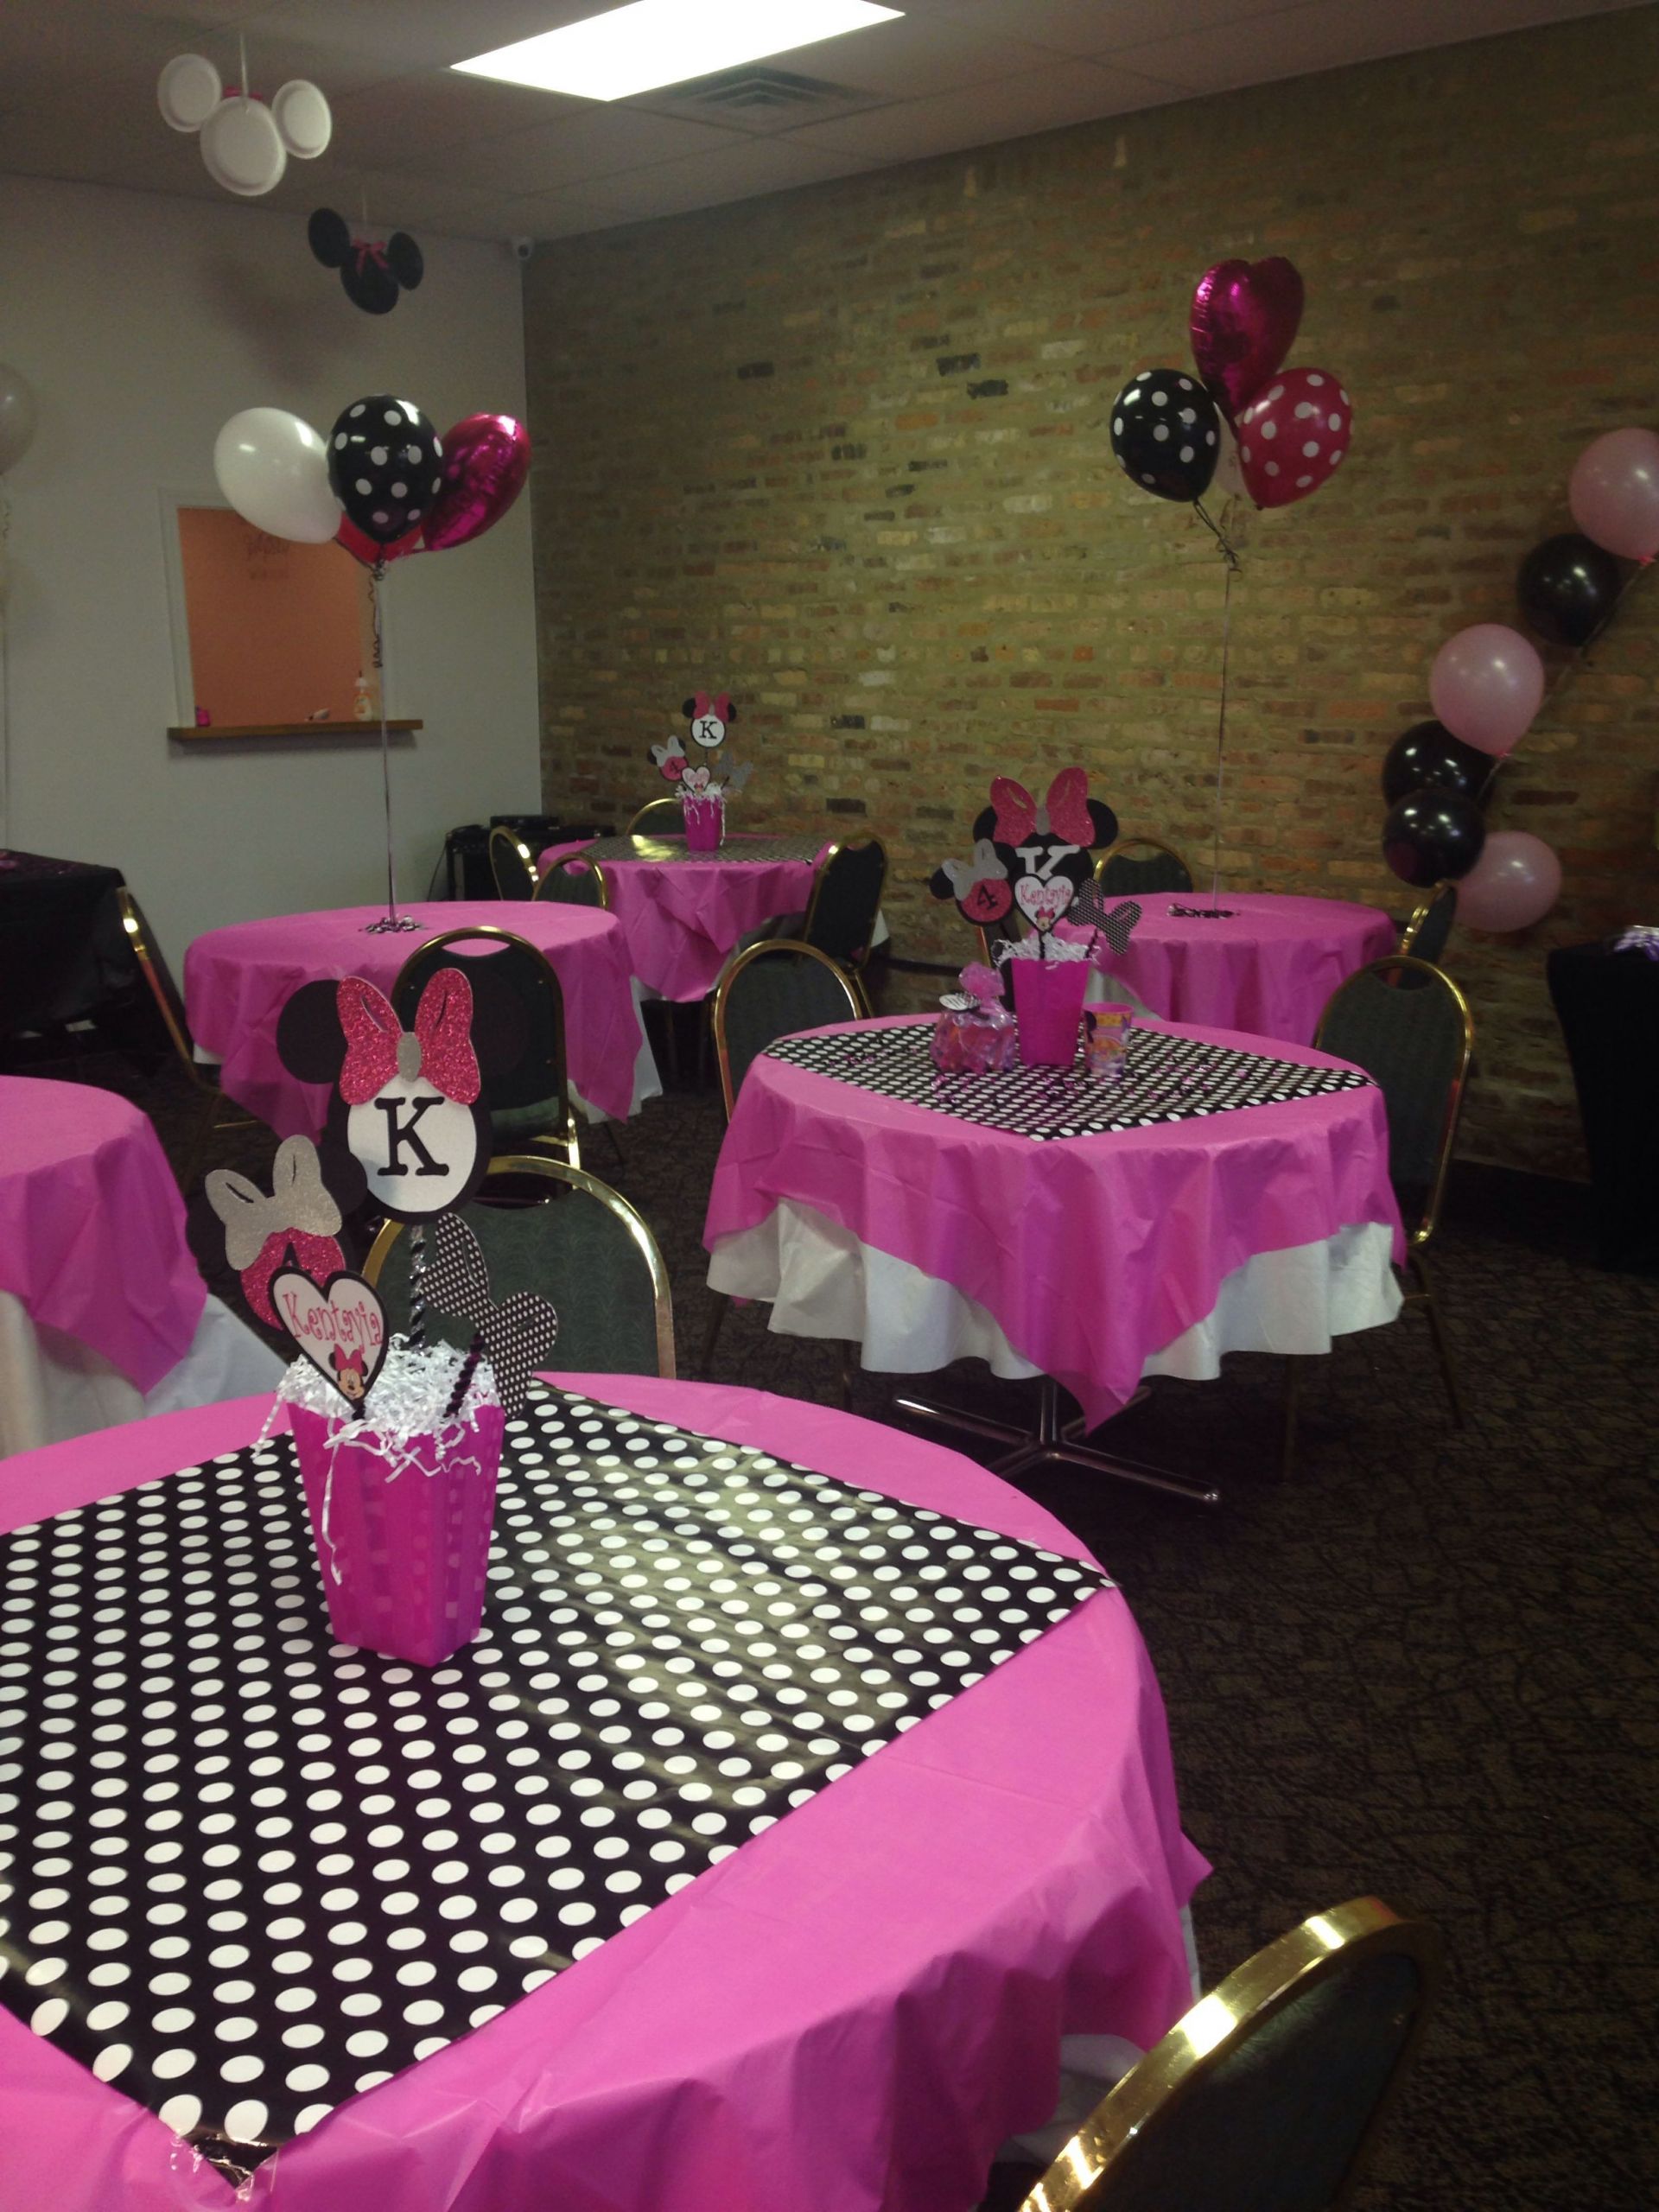 Minnie Mouse Birthday Decor
 Minnie Mouse Party Decorations